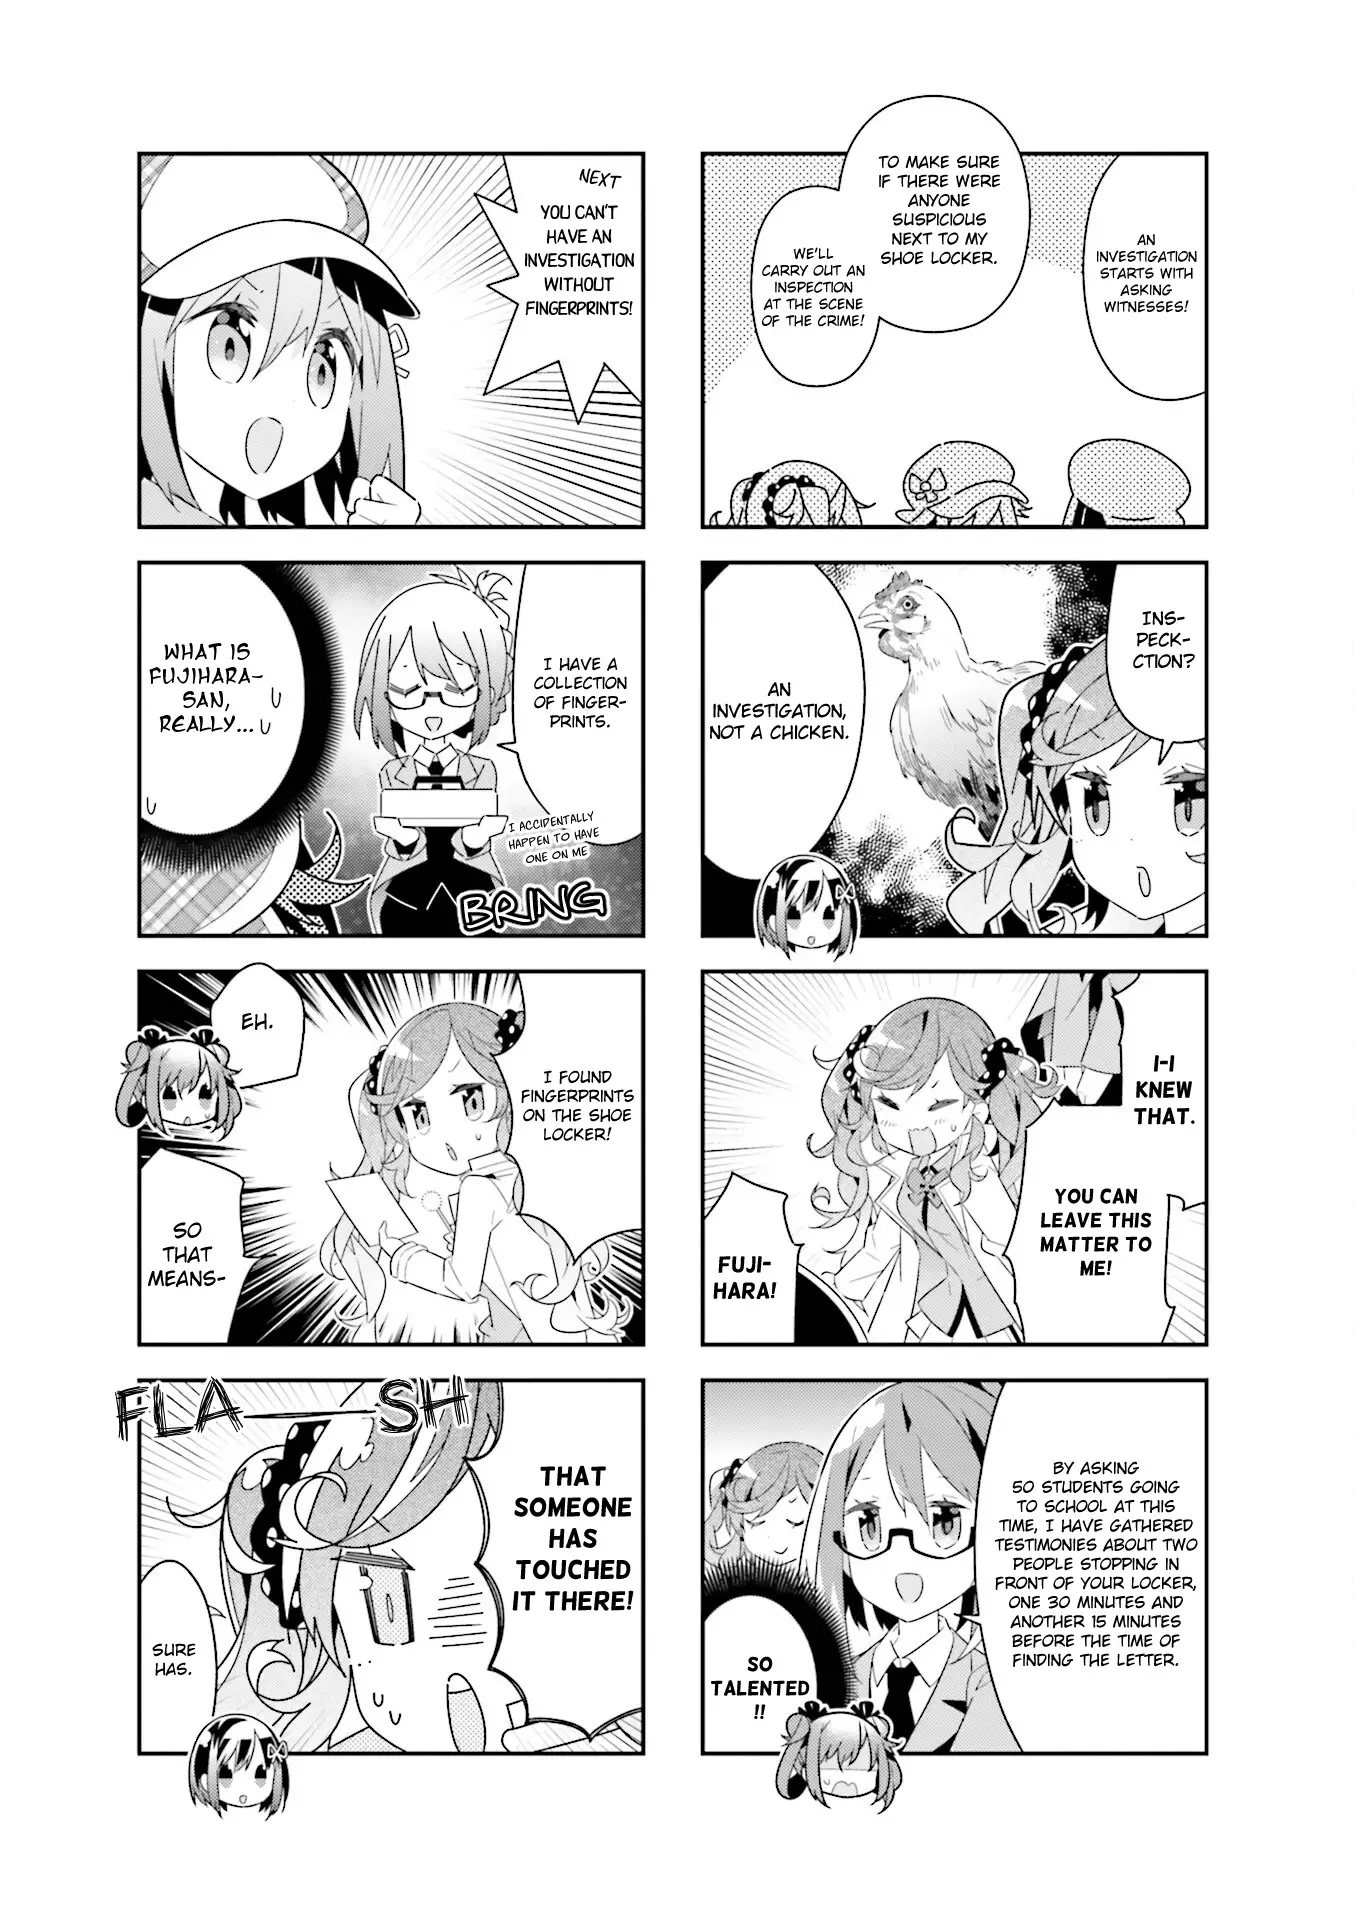 The Life After Retirement Of Magical Girls - 17 page 5-8fab2284